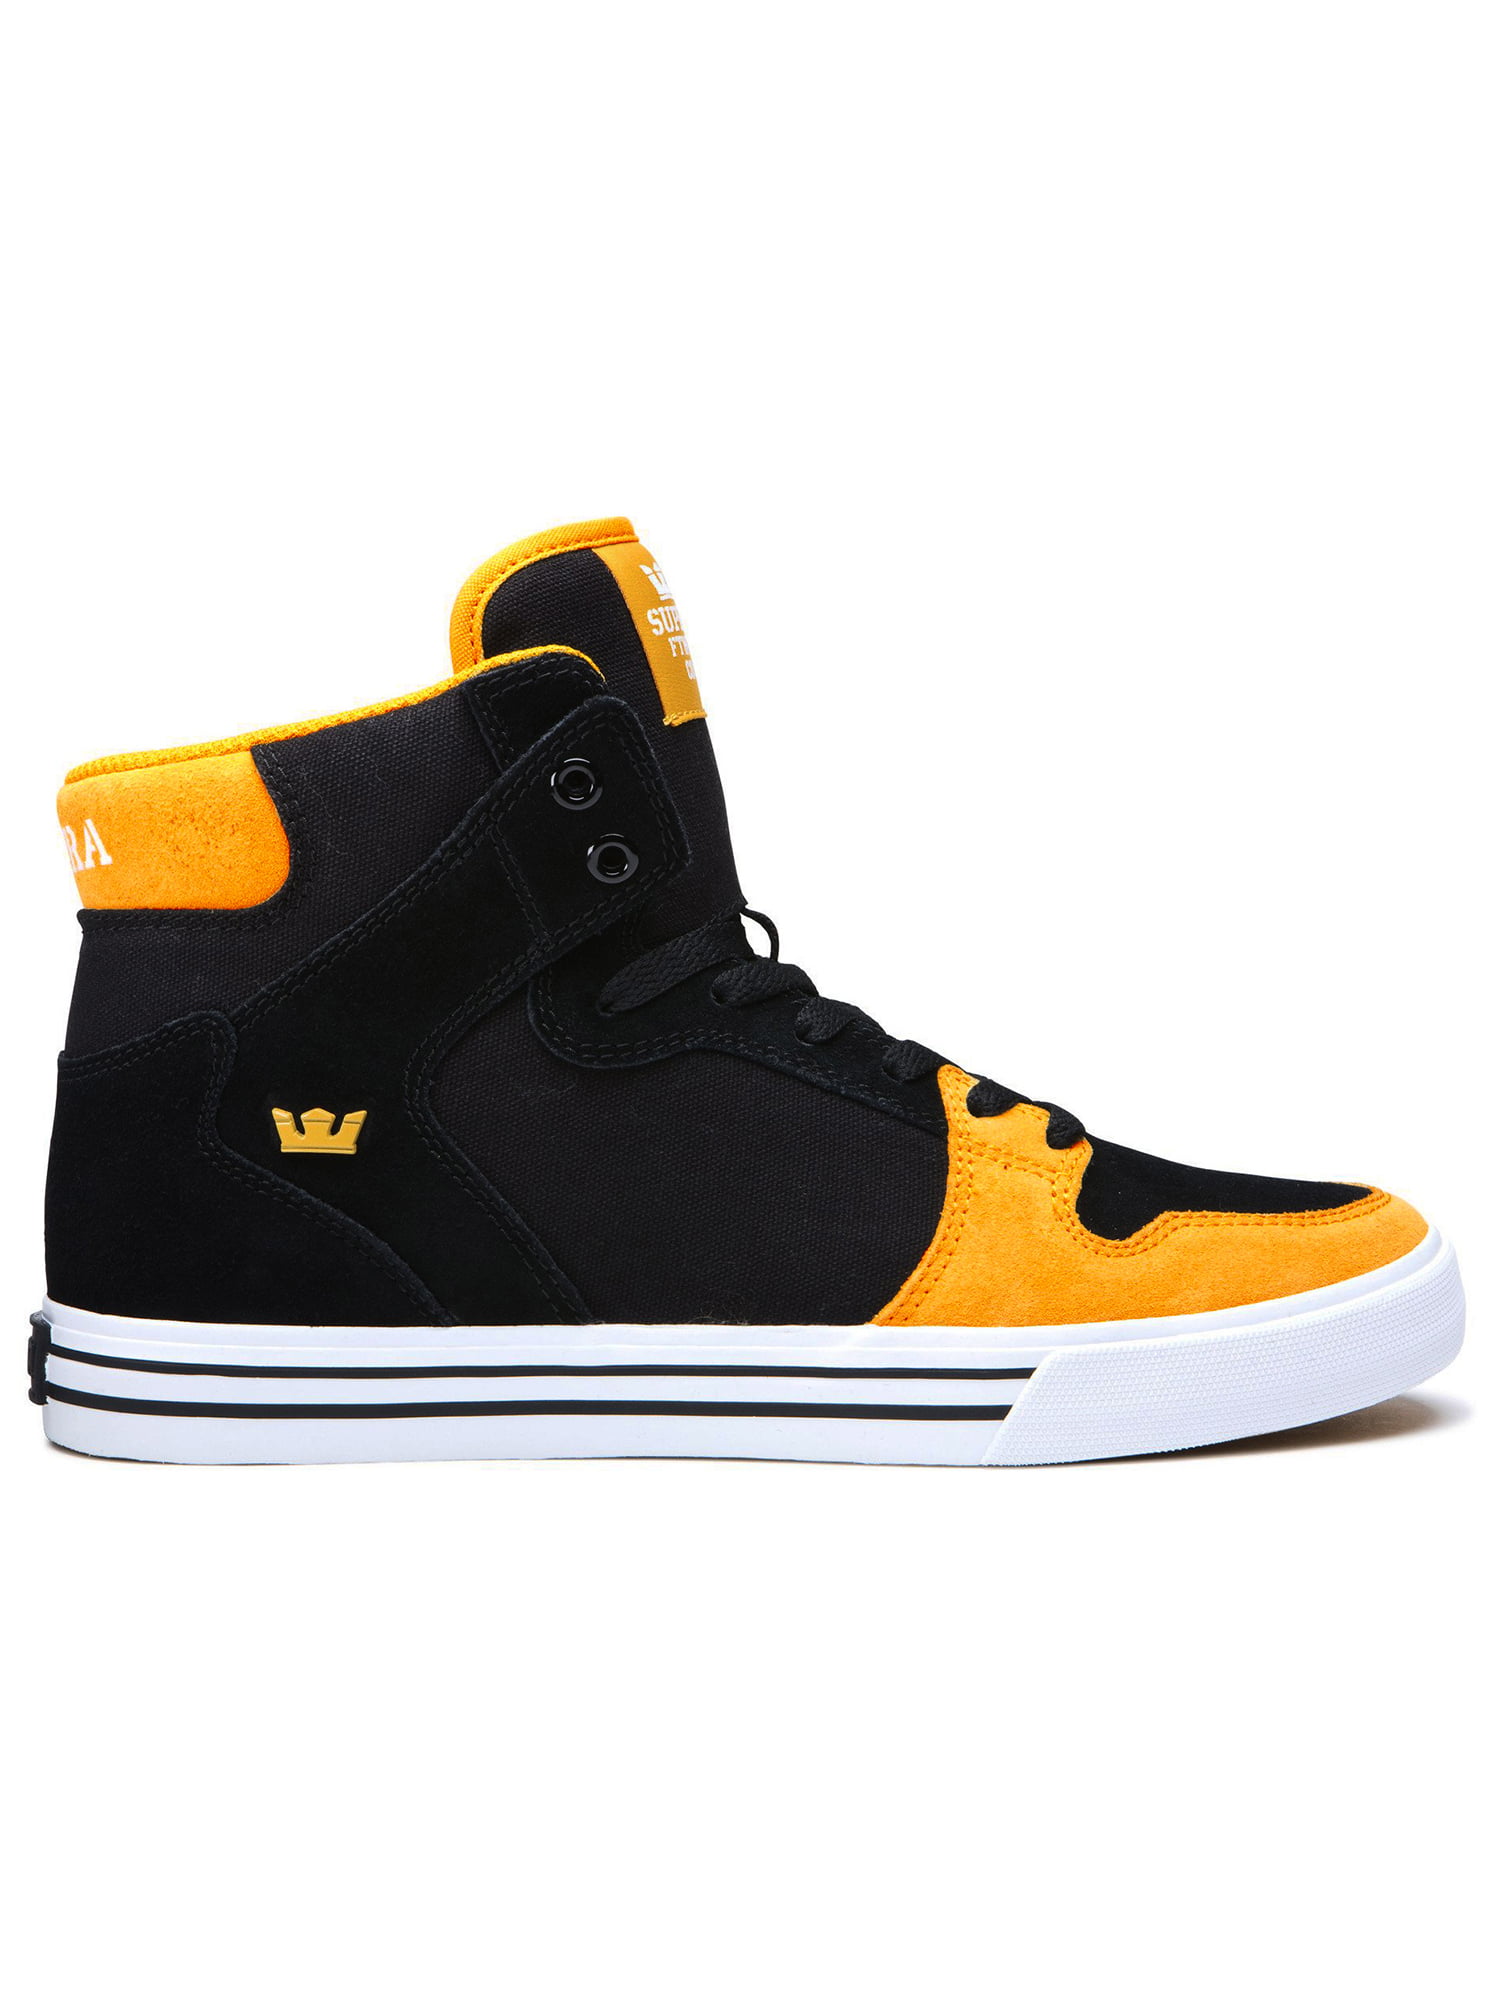 Vaider High Top Skate Shoes